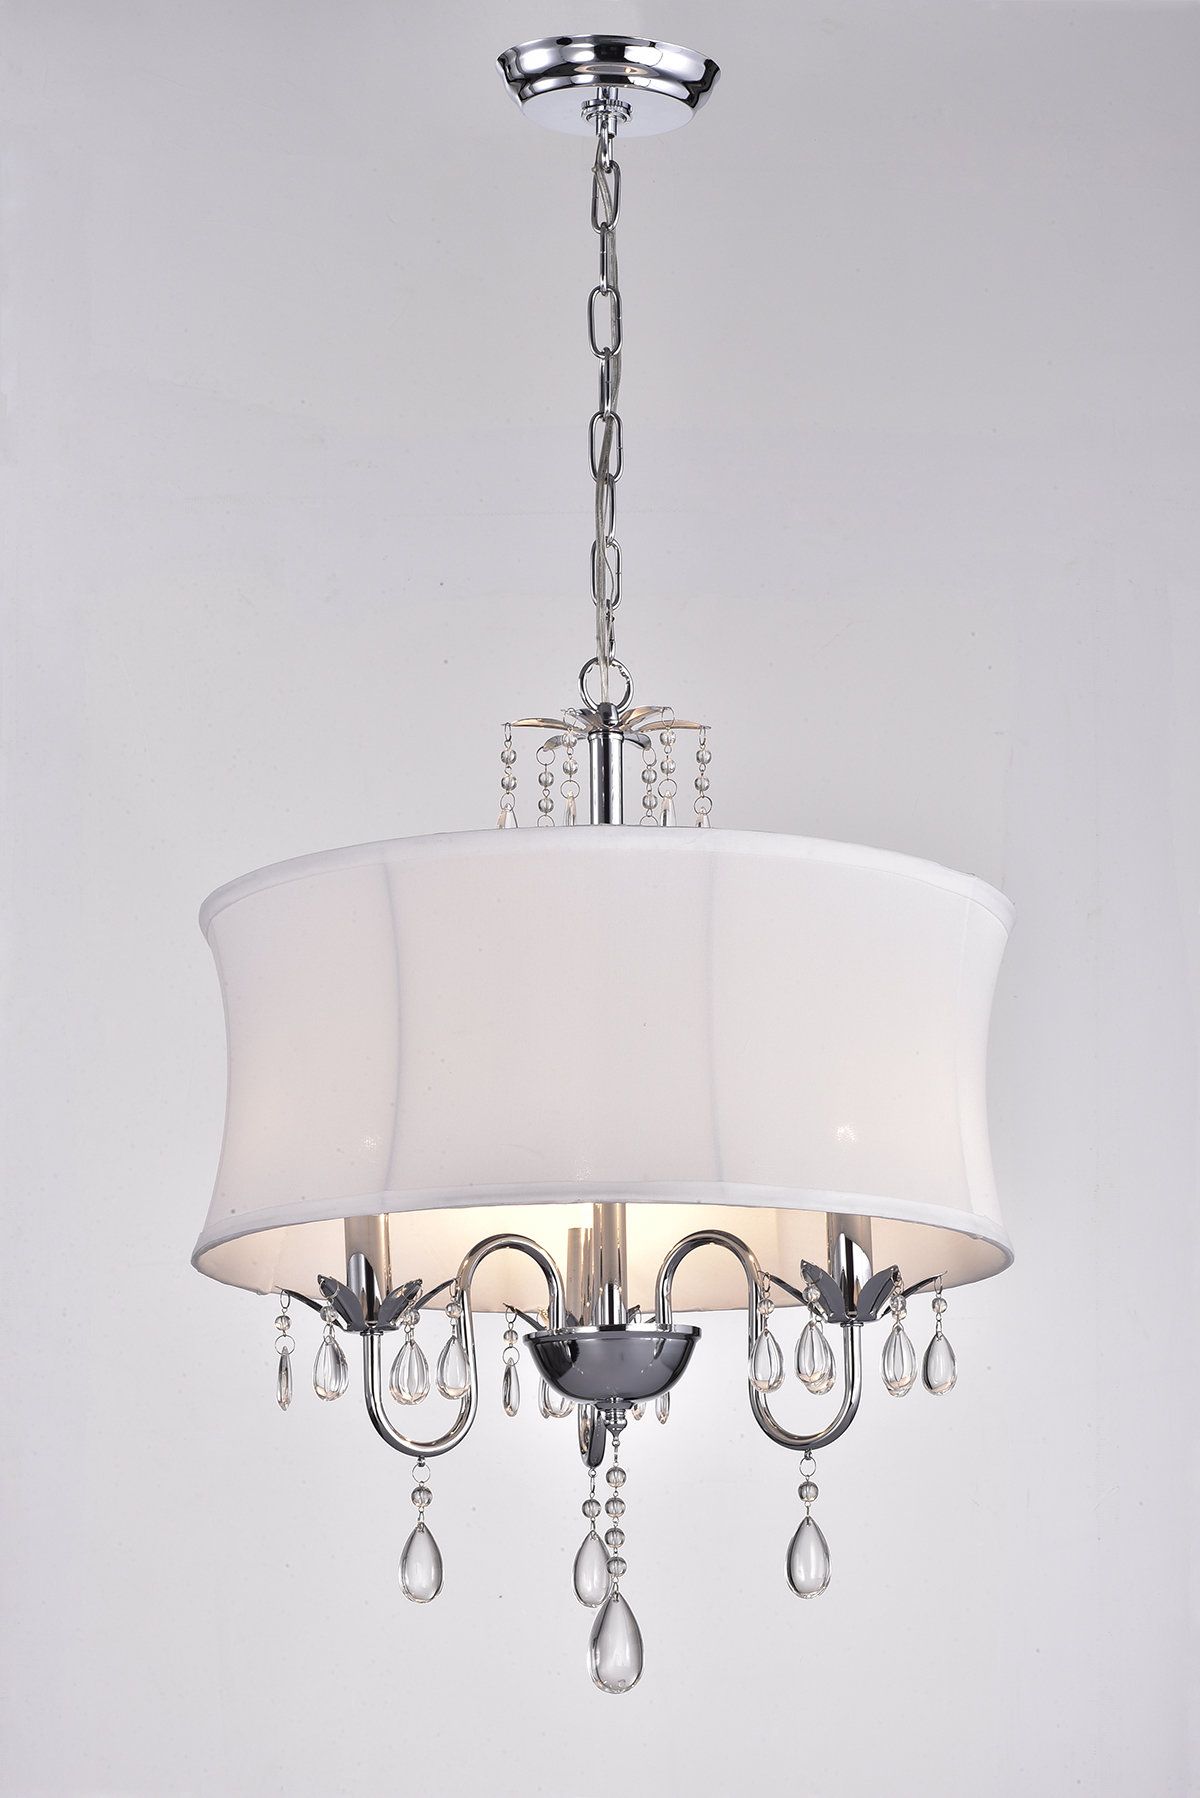 Leandra 3 Light Drum Chandelier With Most Recent Buster 5 Light Drum Chandeliers (View 7 of 25)